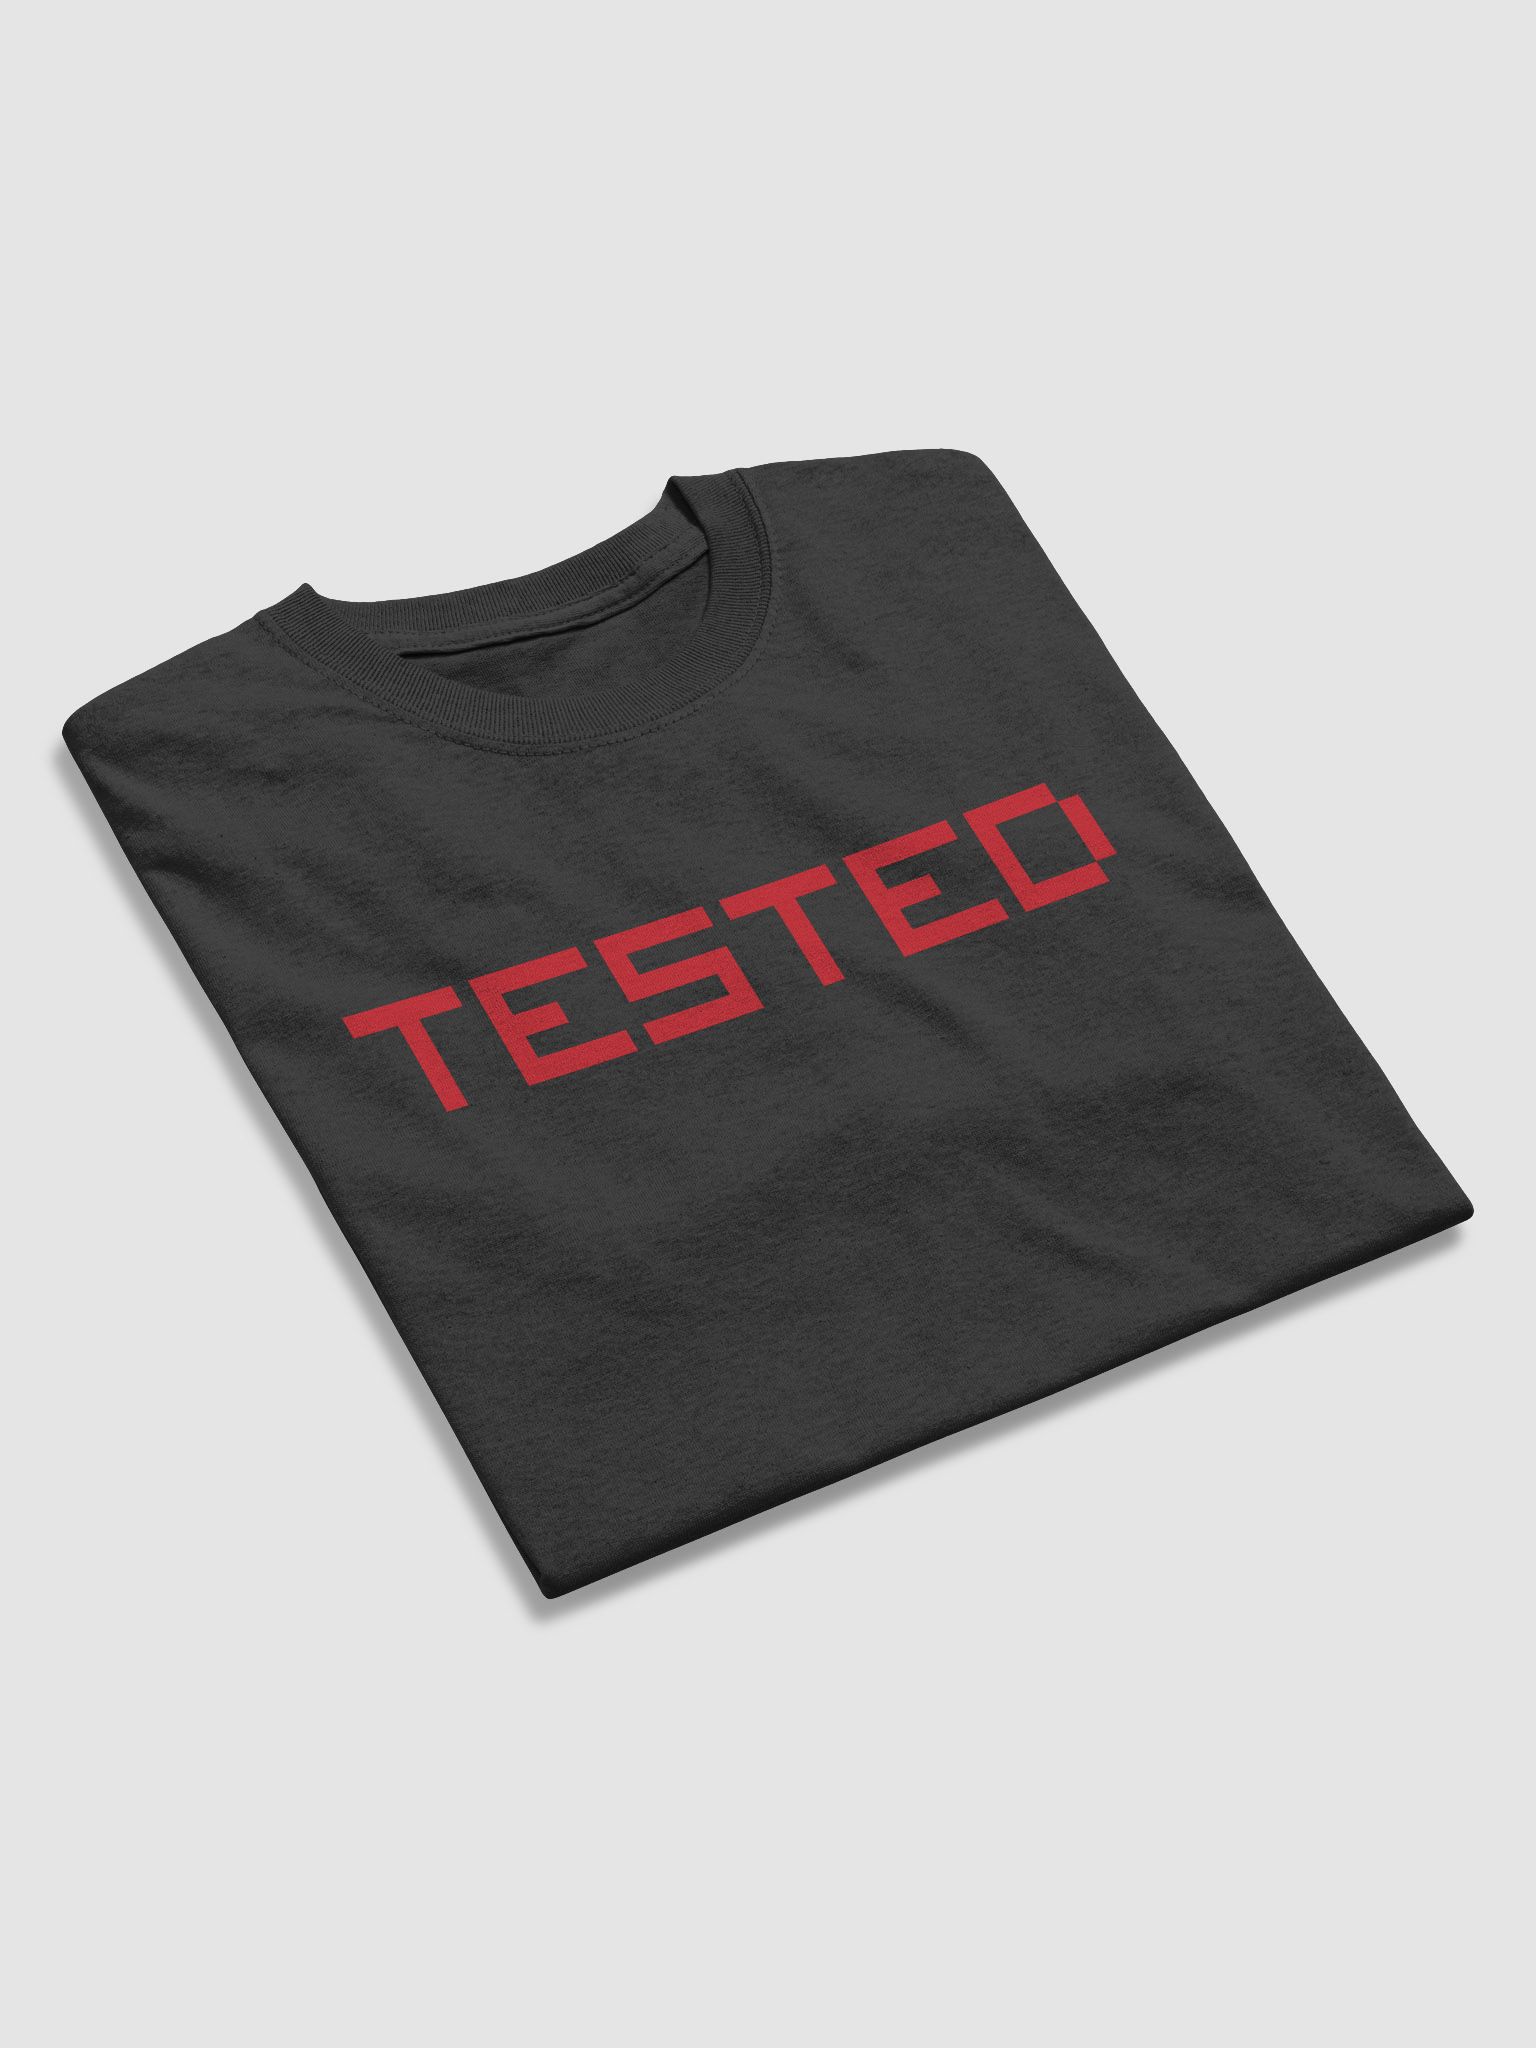 Social Media Verified Account Check Mark Essential T-Shirt by Dodgefather